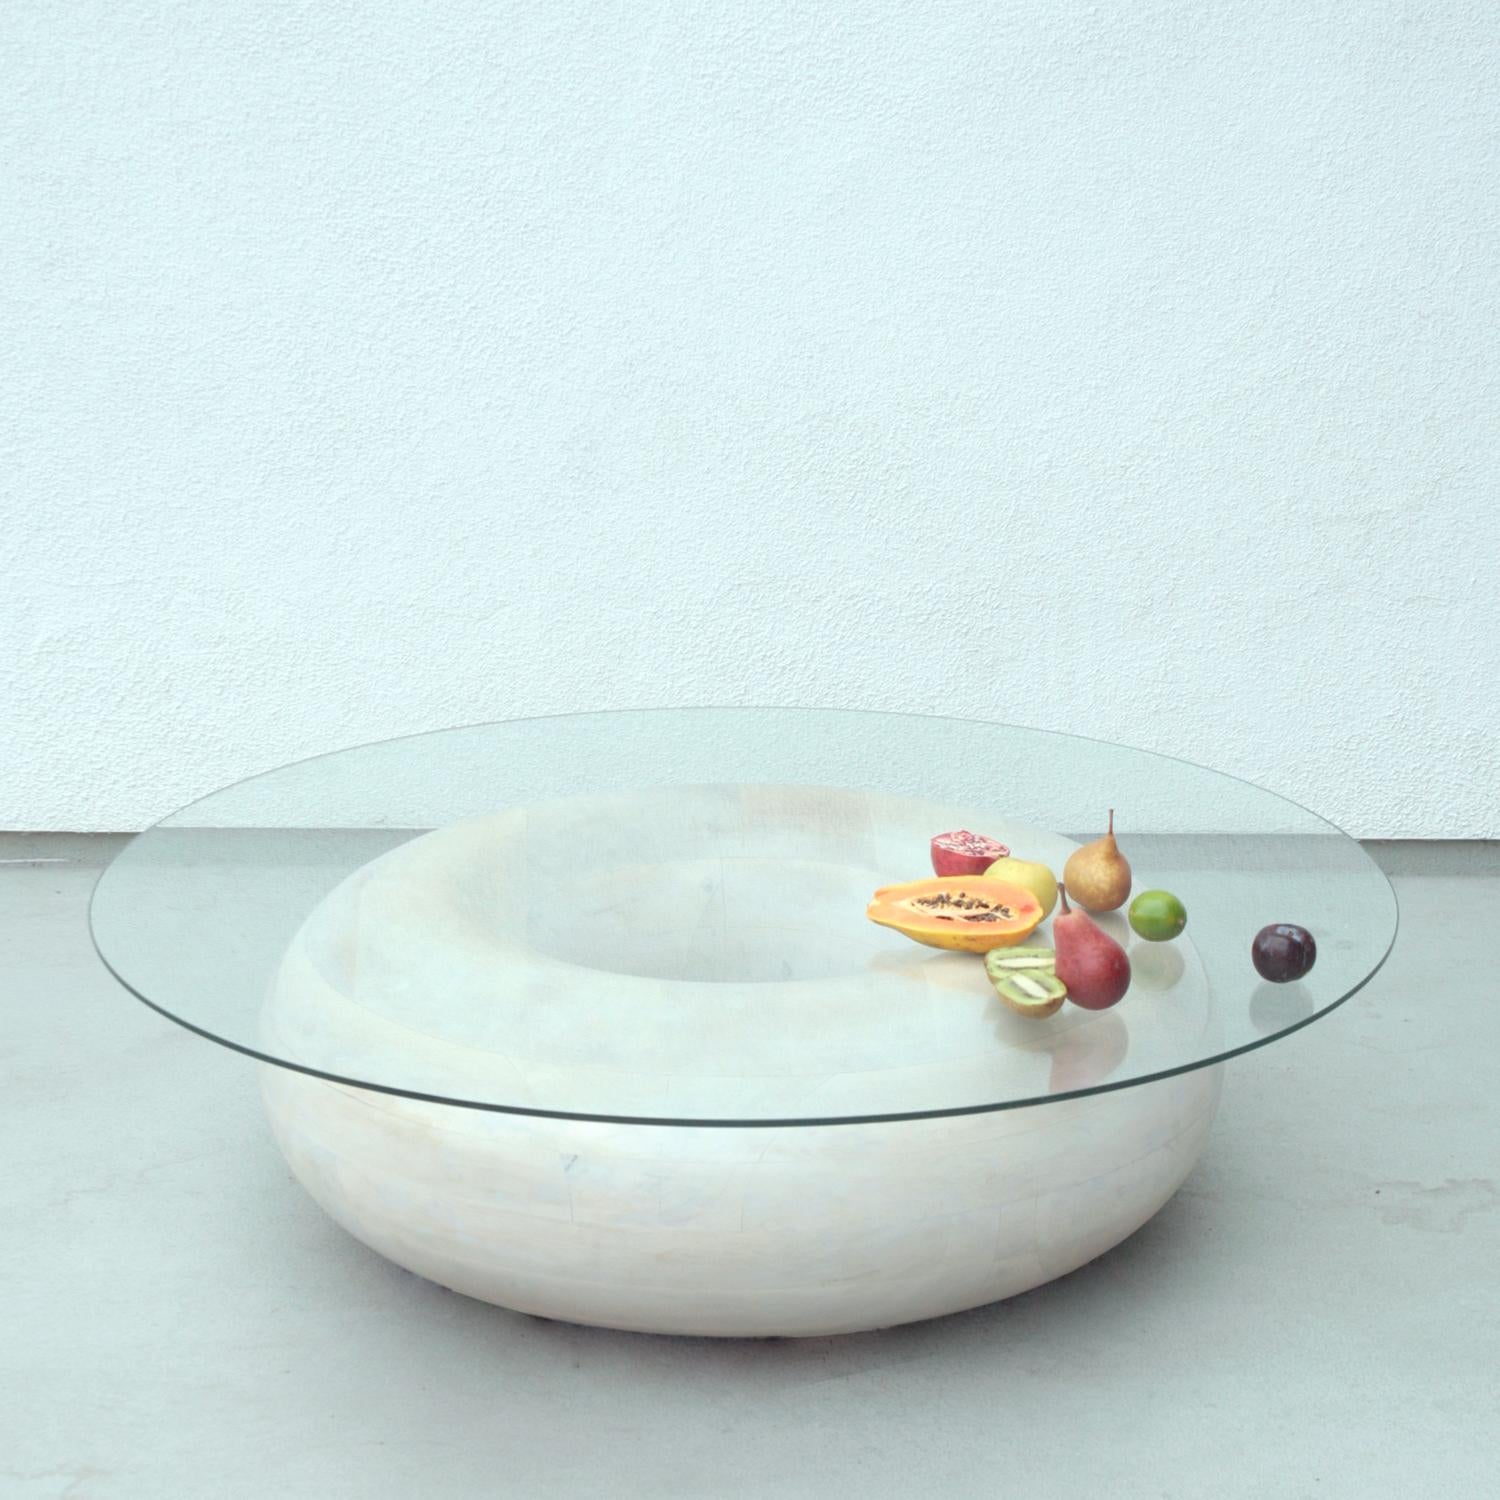 Sugar donut coffee table by Soft-geometry
Materials: Solid mango wood coffee table, sugar glaze, glass top
Dimensions: 48 x 48 x 12” H

The donut table was born from the challenge of using vast quantities of factory waste end boards - cut offs from